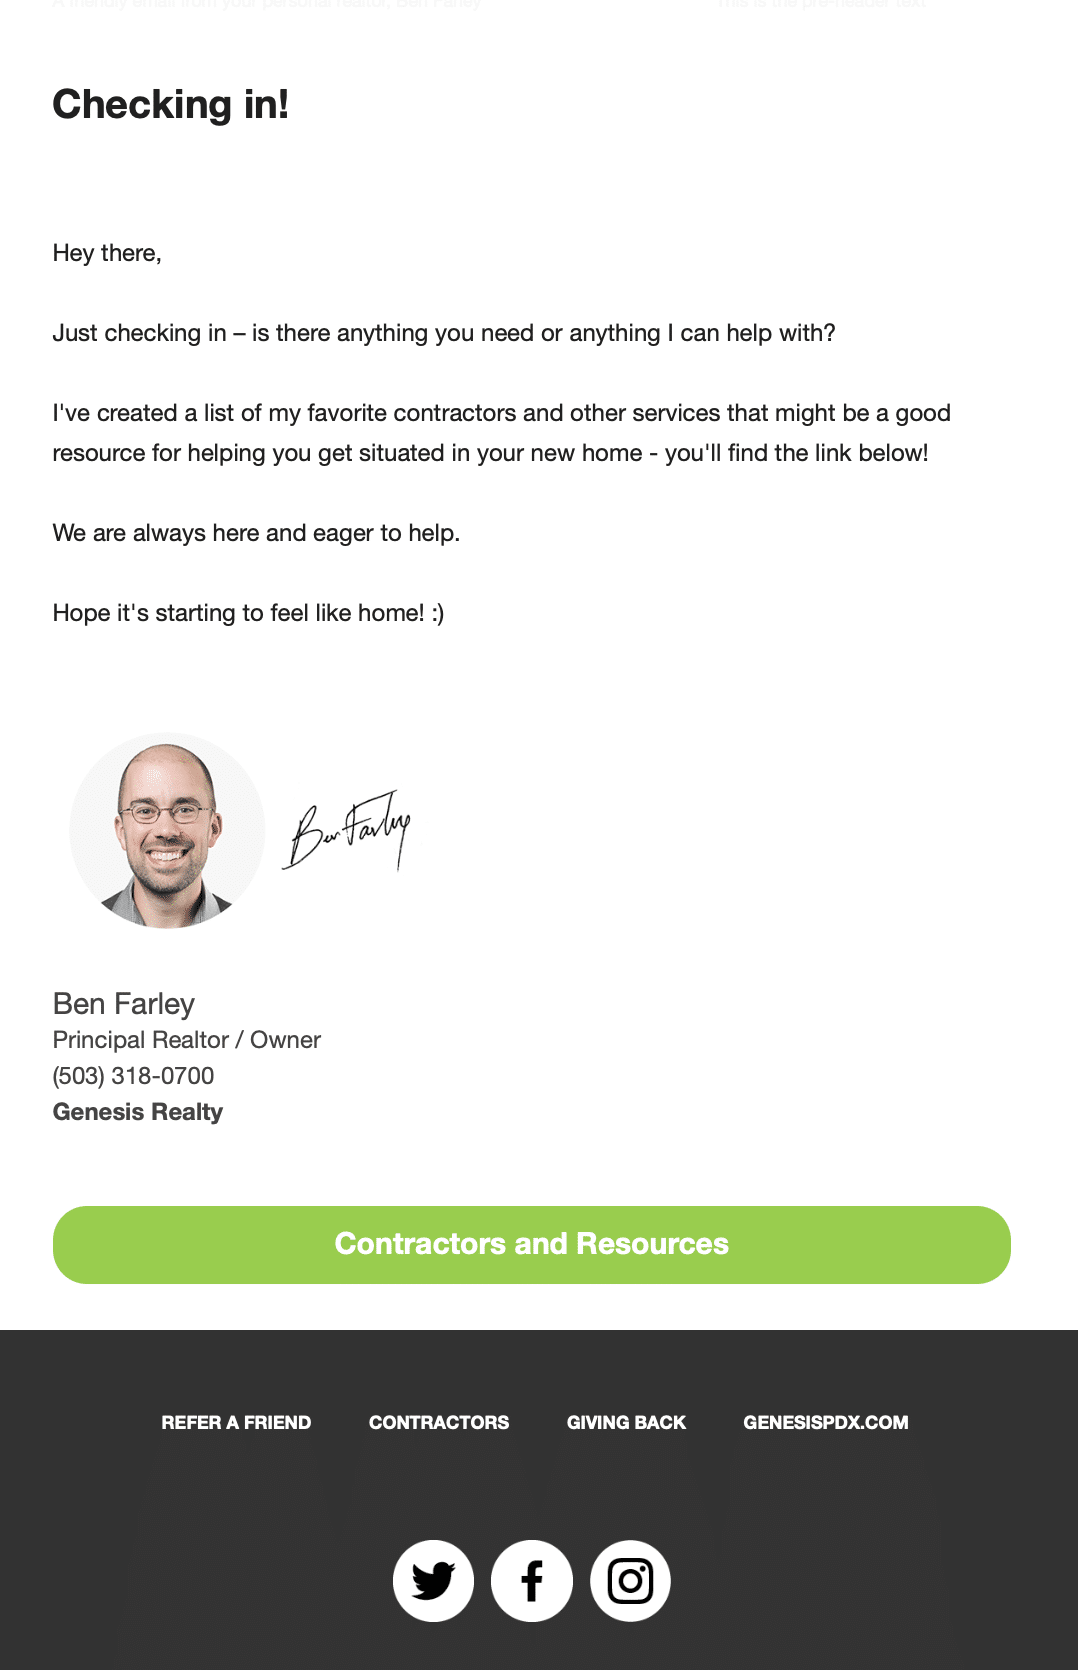 This email from Ben at Genesis Realty reminds the buyer of their home purchase a year ago and points them to resources if they need help.